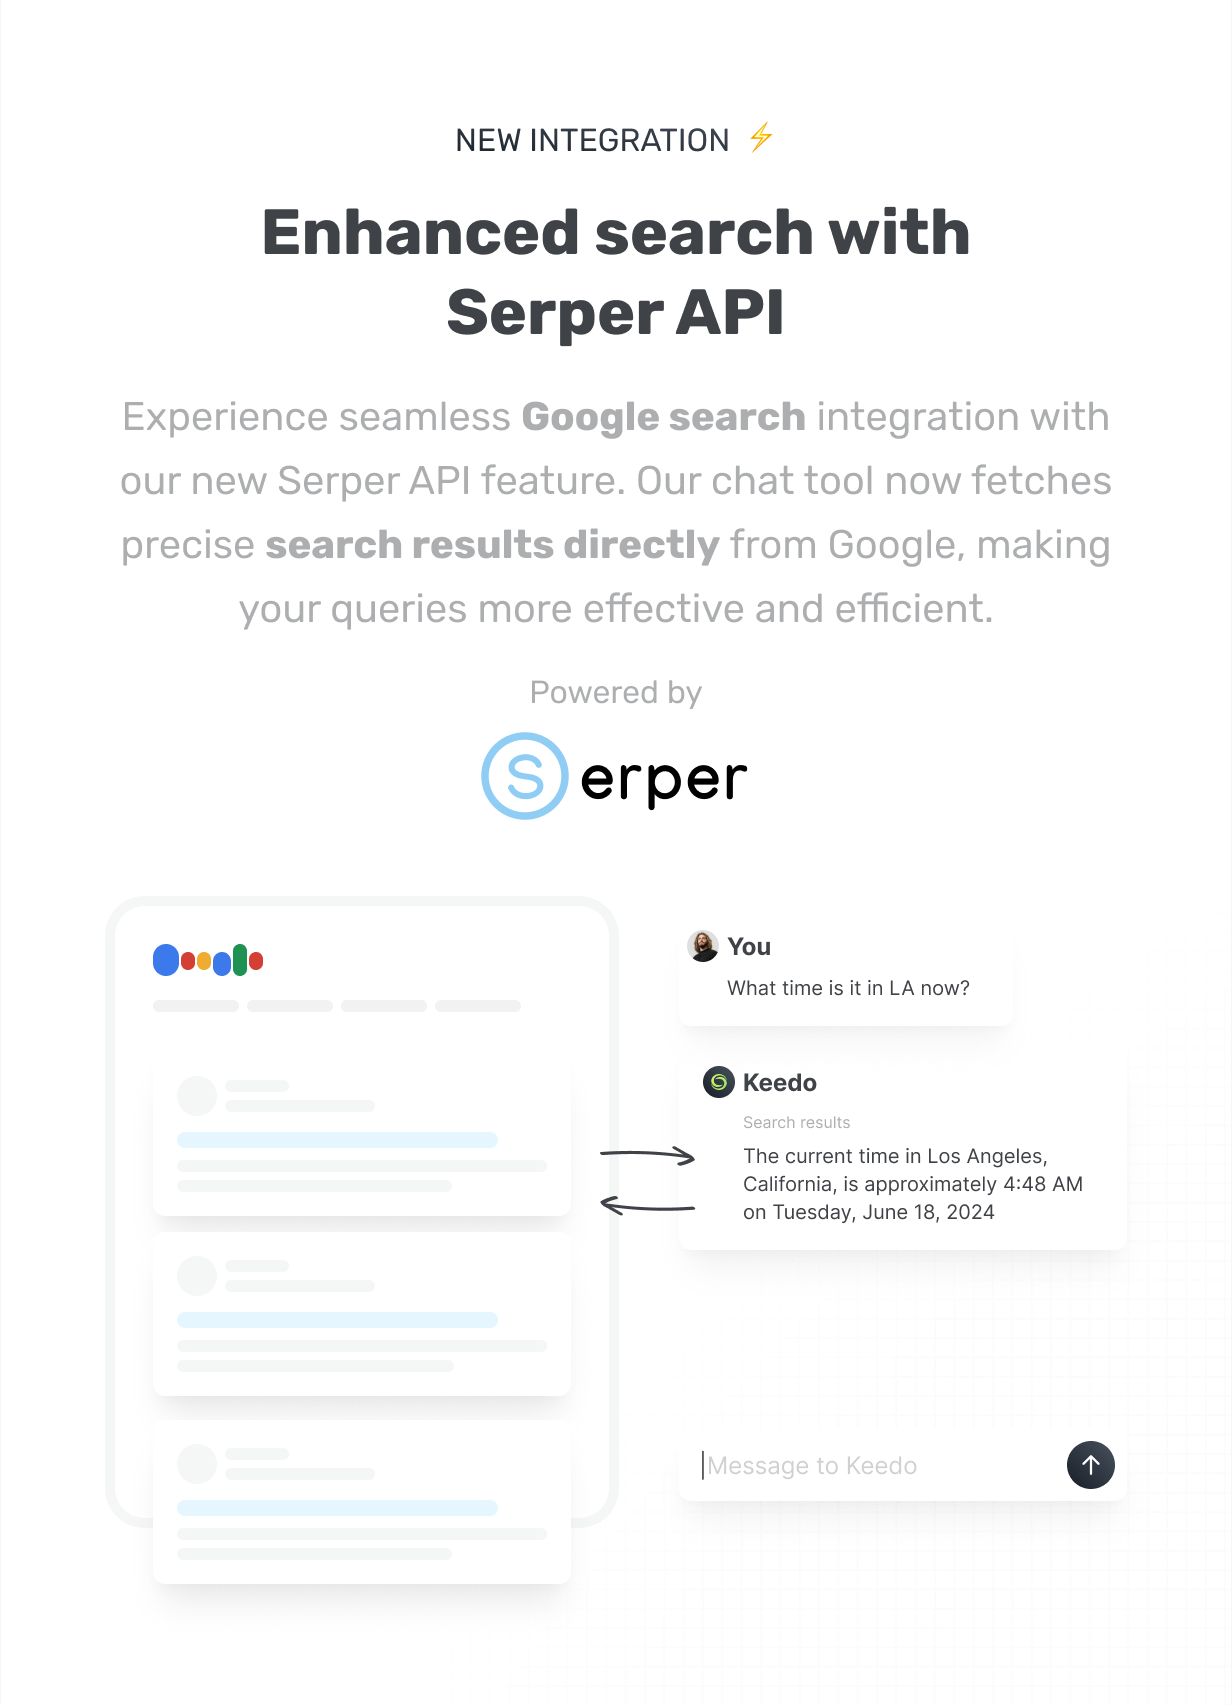 Enhanced Search with Serper API - Experience seamless Google search integration with our new Serper API feature. Our chat tool now fetches precise search results directly from Google, making your queries more effective and efficient. @heyaikeedo #aikeedo